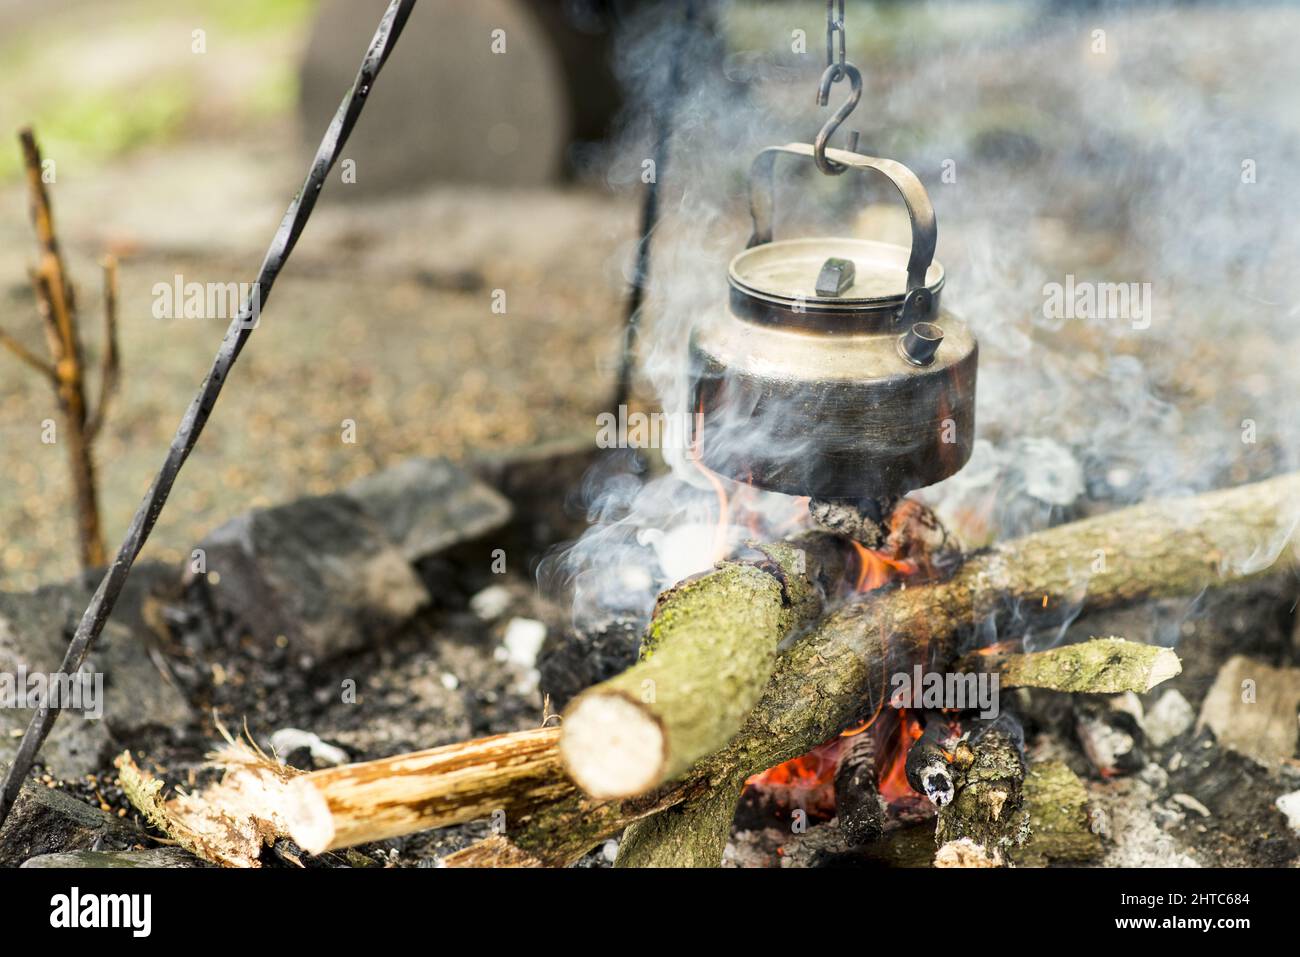 https://c8.alamy.com/comp/2HTC684/closeup-shot-of-the-outdoor-fire-pit-and-the-tea-kettle-hanging-and-boiling-in-the-forest-2HTC684.jpg